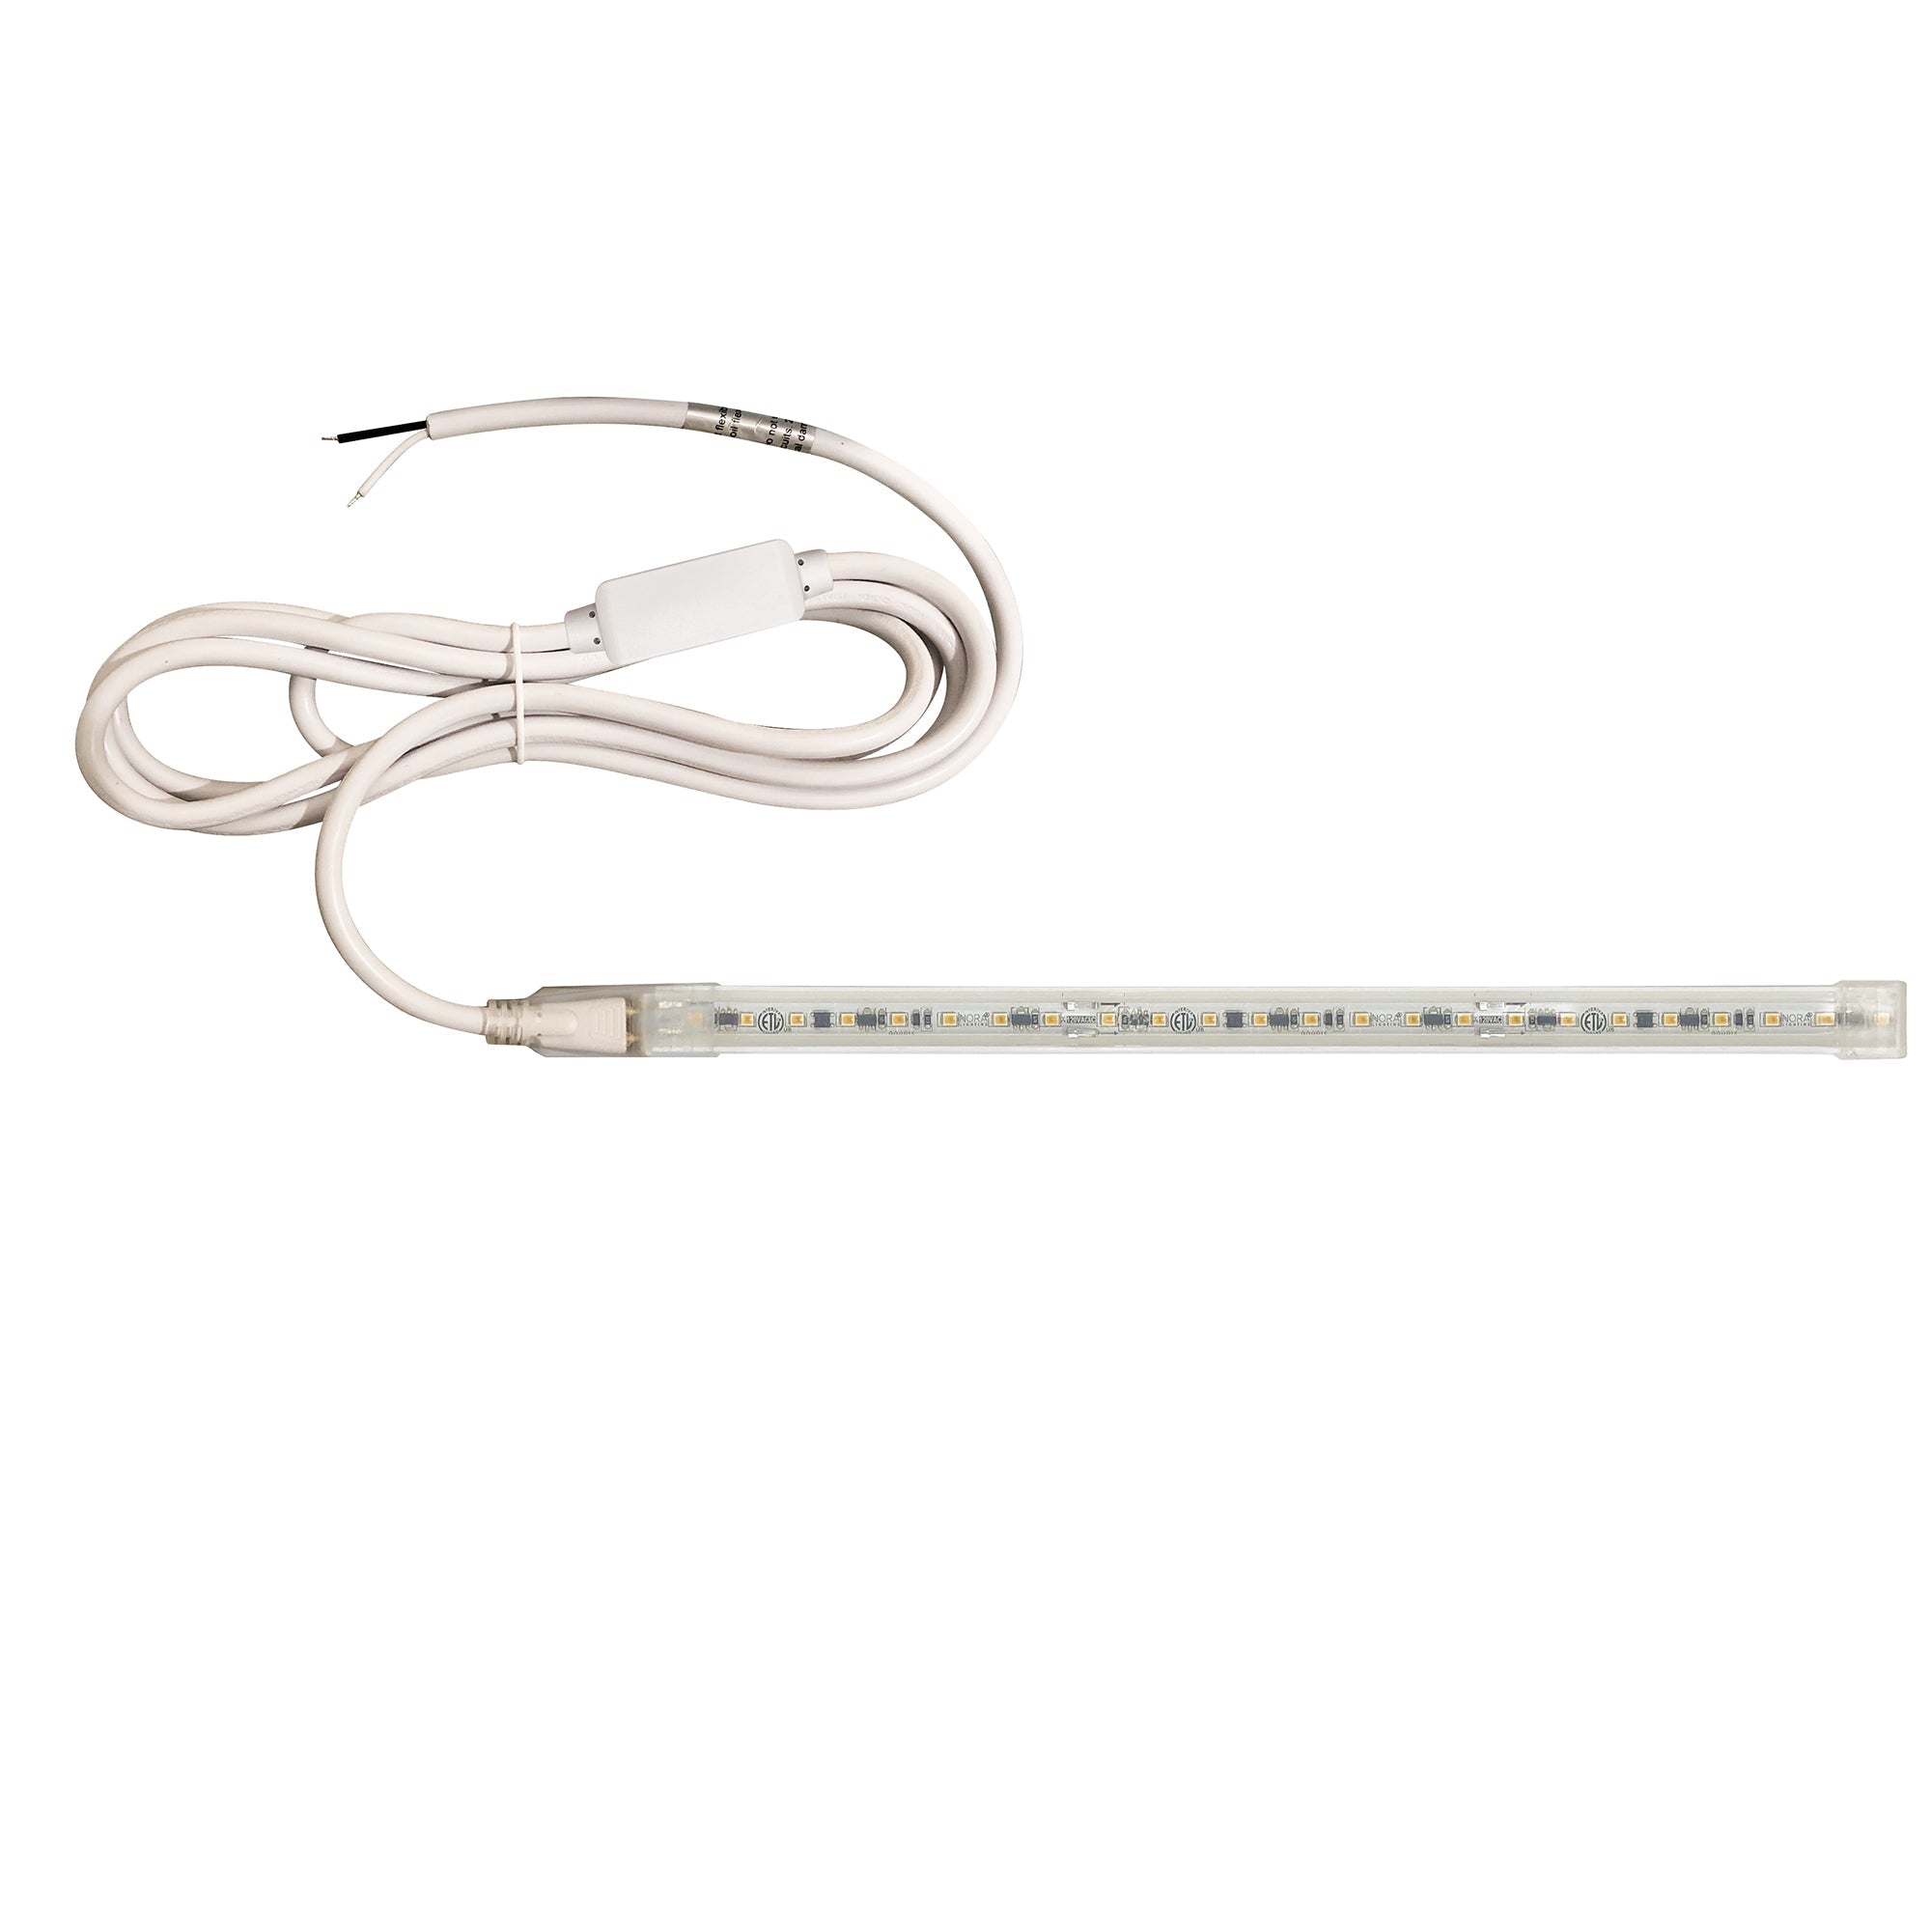 Nora Lighting NUTP13-W115-4-12-930/HWSP - Accent / Undercabinet - Custom Cut 115-ft, 4-in 120V Continuous LED Tape Light, 330lm / 3.6W per foot, 3000K, w/ Mounting Clips and 8' Hardwired Power Cord w/ Surge Protector